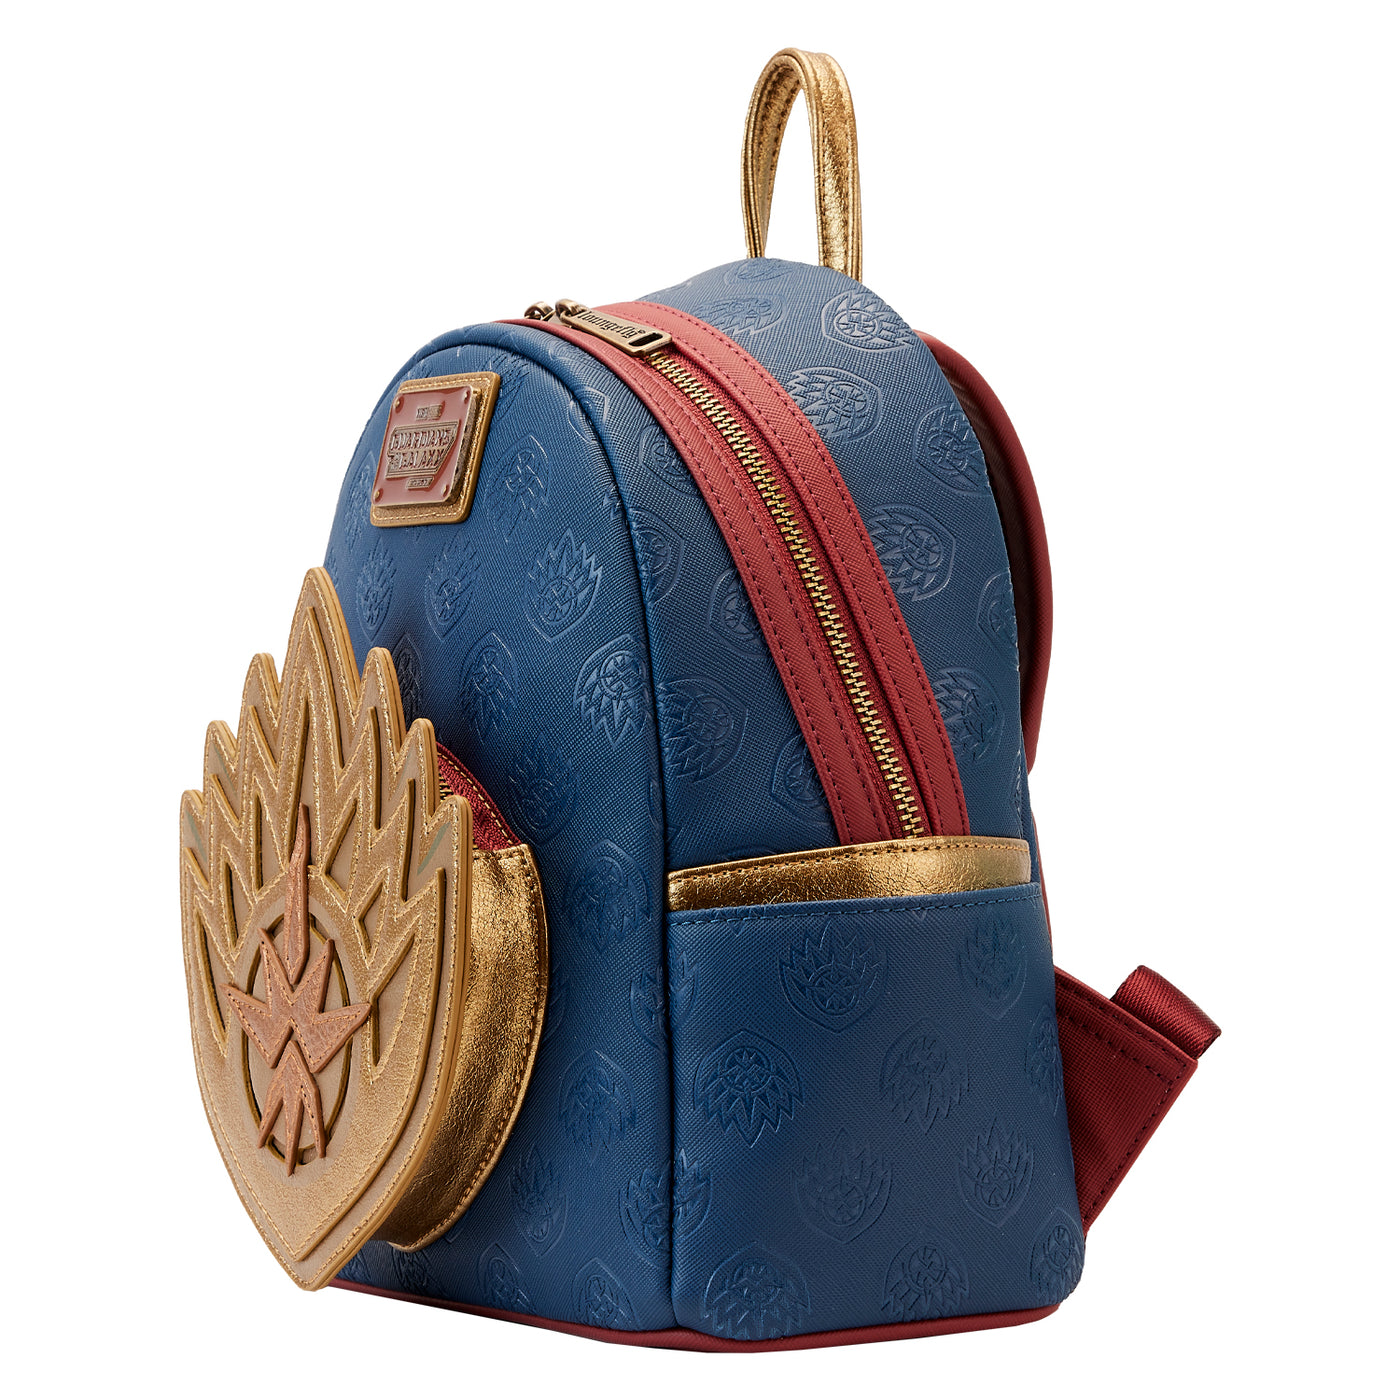 Marvel Guardians of the Galaxy Vol 3 Ravager Badge Mini Backpack